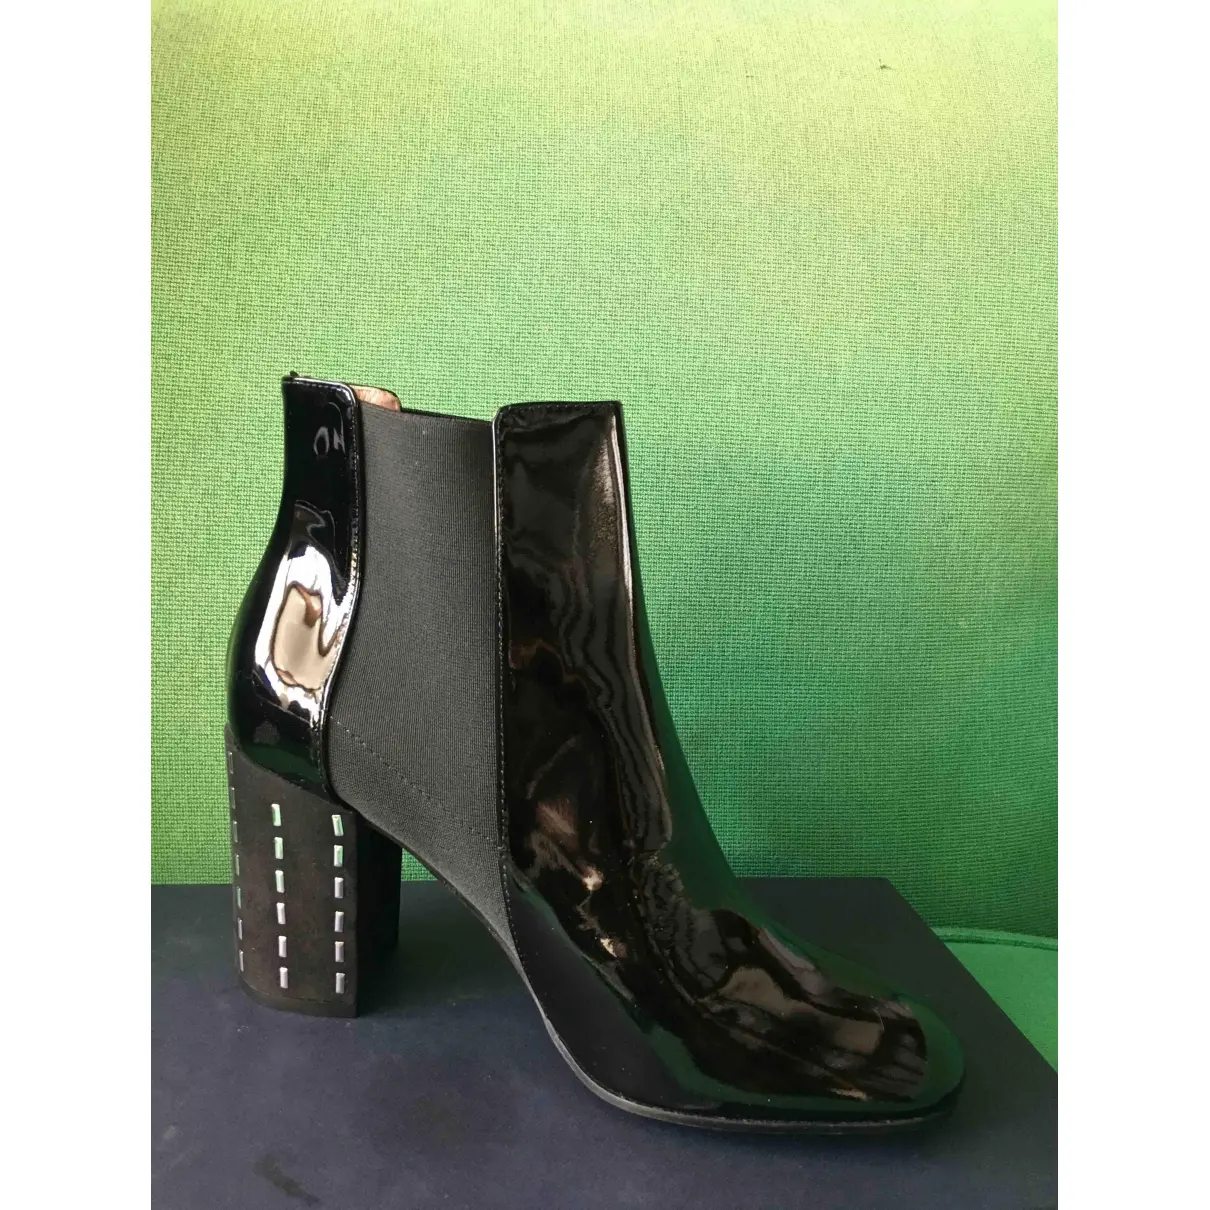 Pollini Patent leather boots for sale